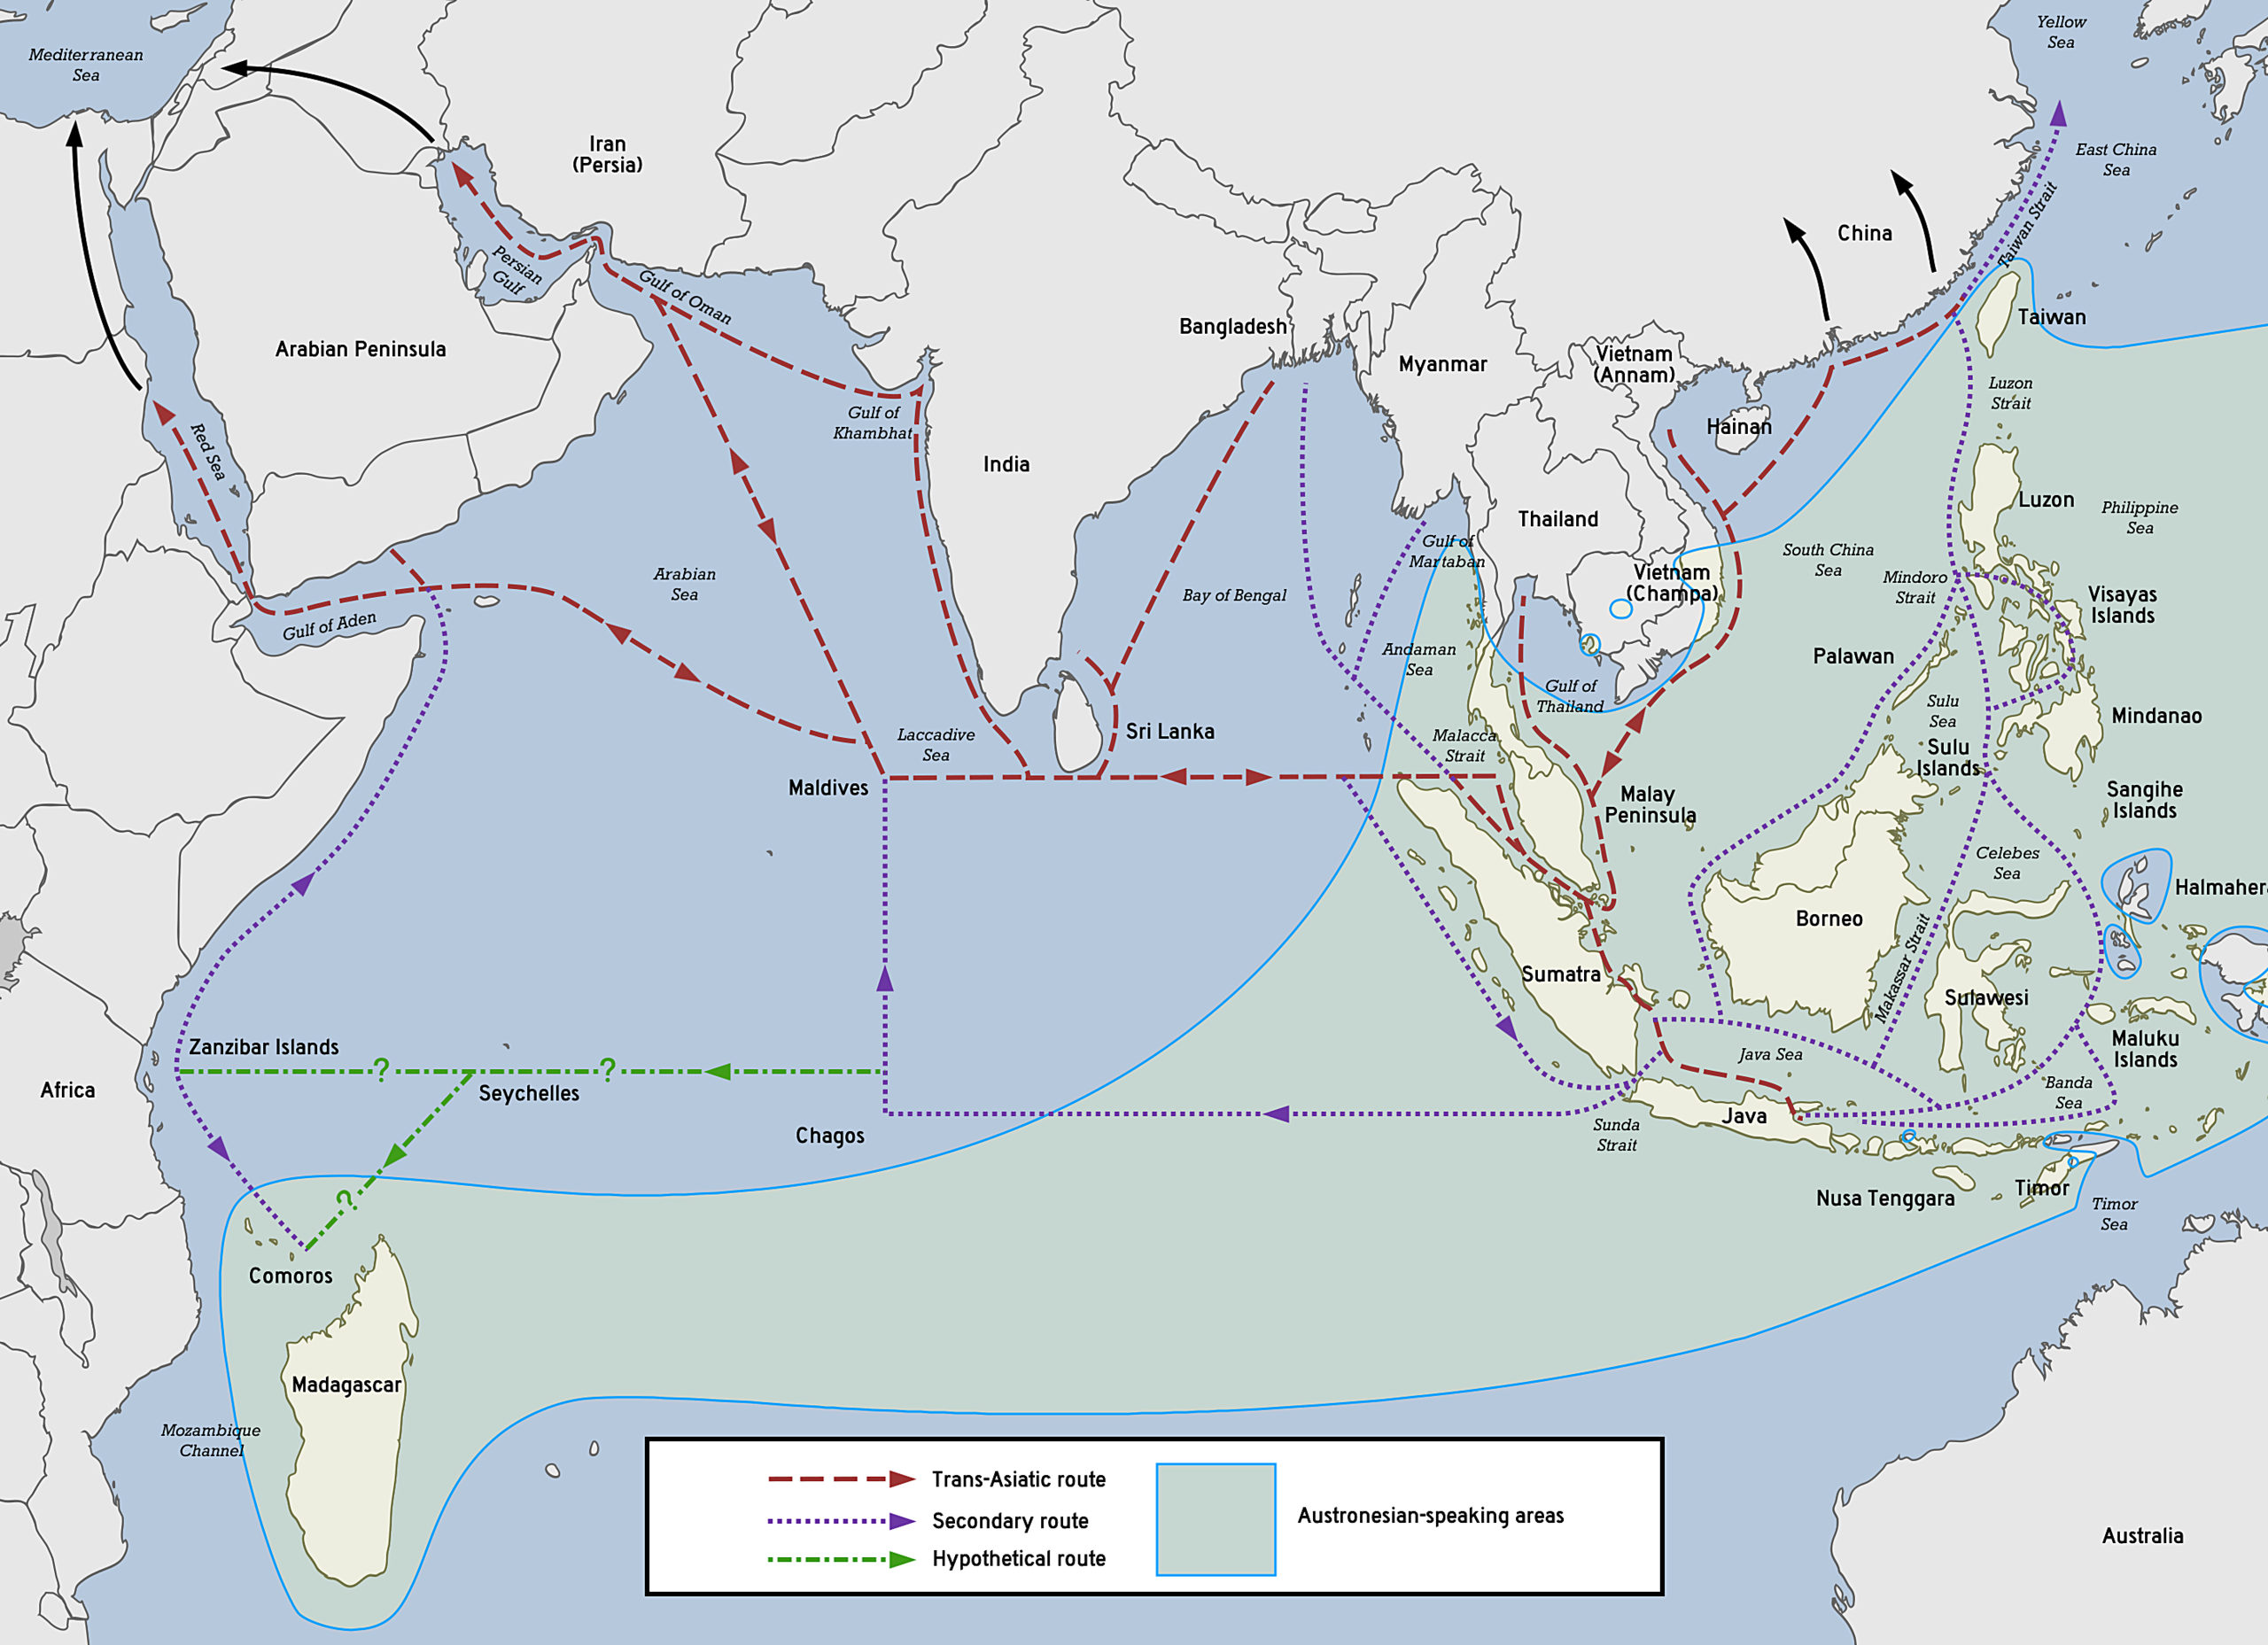 2560px-Austronesian_maritime_trade_network_in_the_Indian_Ocean.png